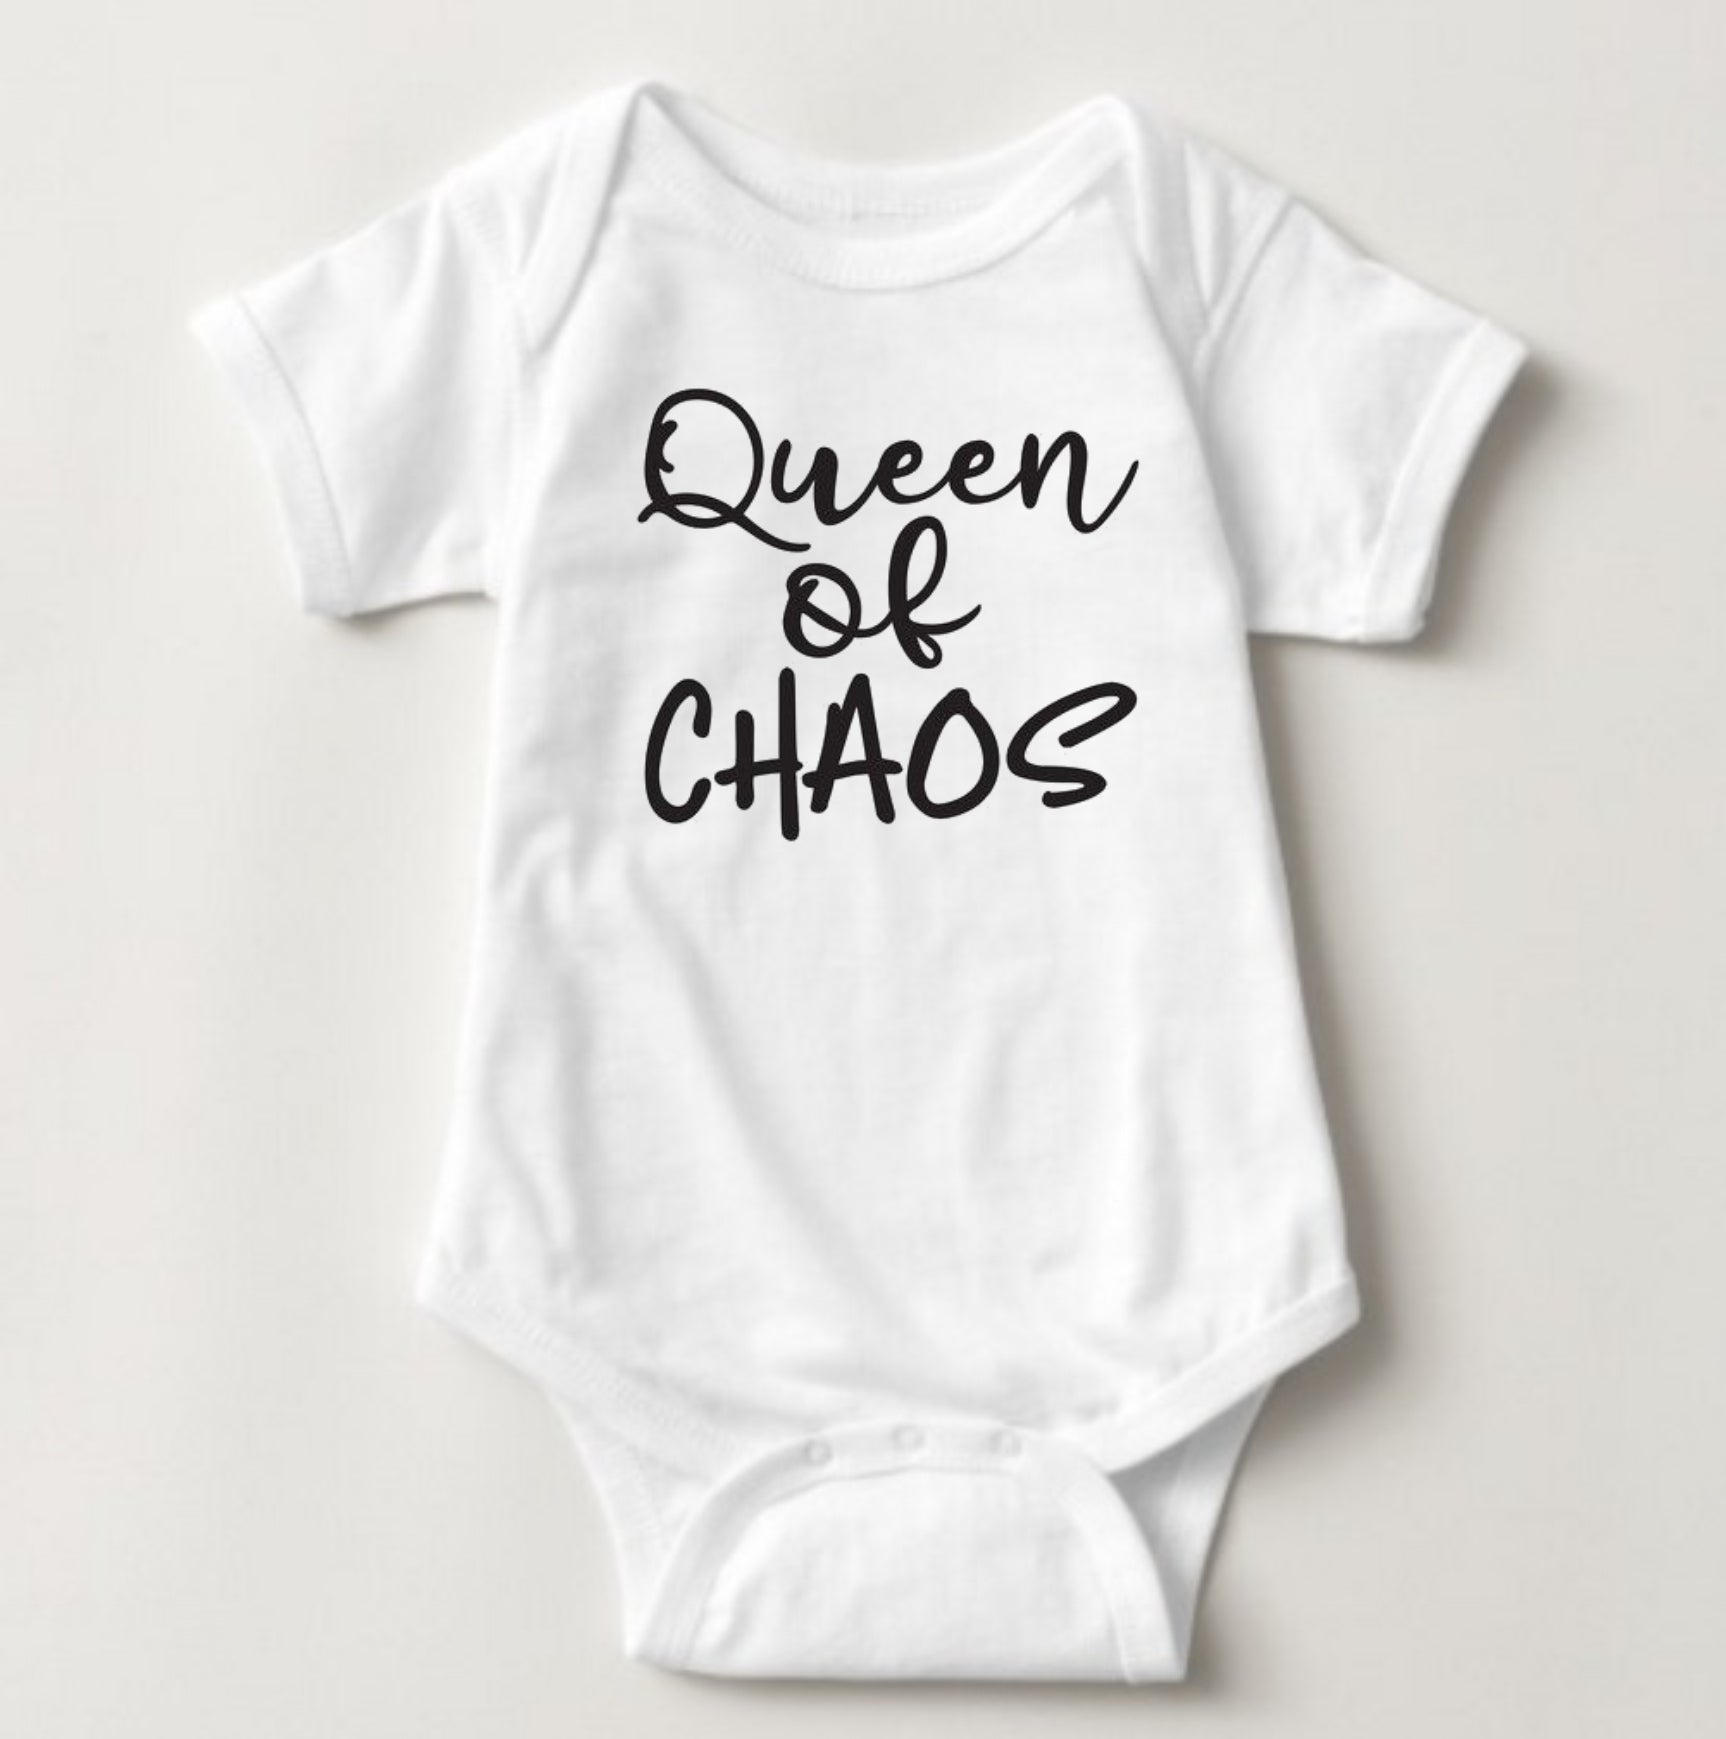 Baby Statement Onesies - Queen of Chaos - MYSTYLEMYCLOTHING